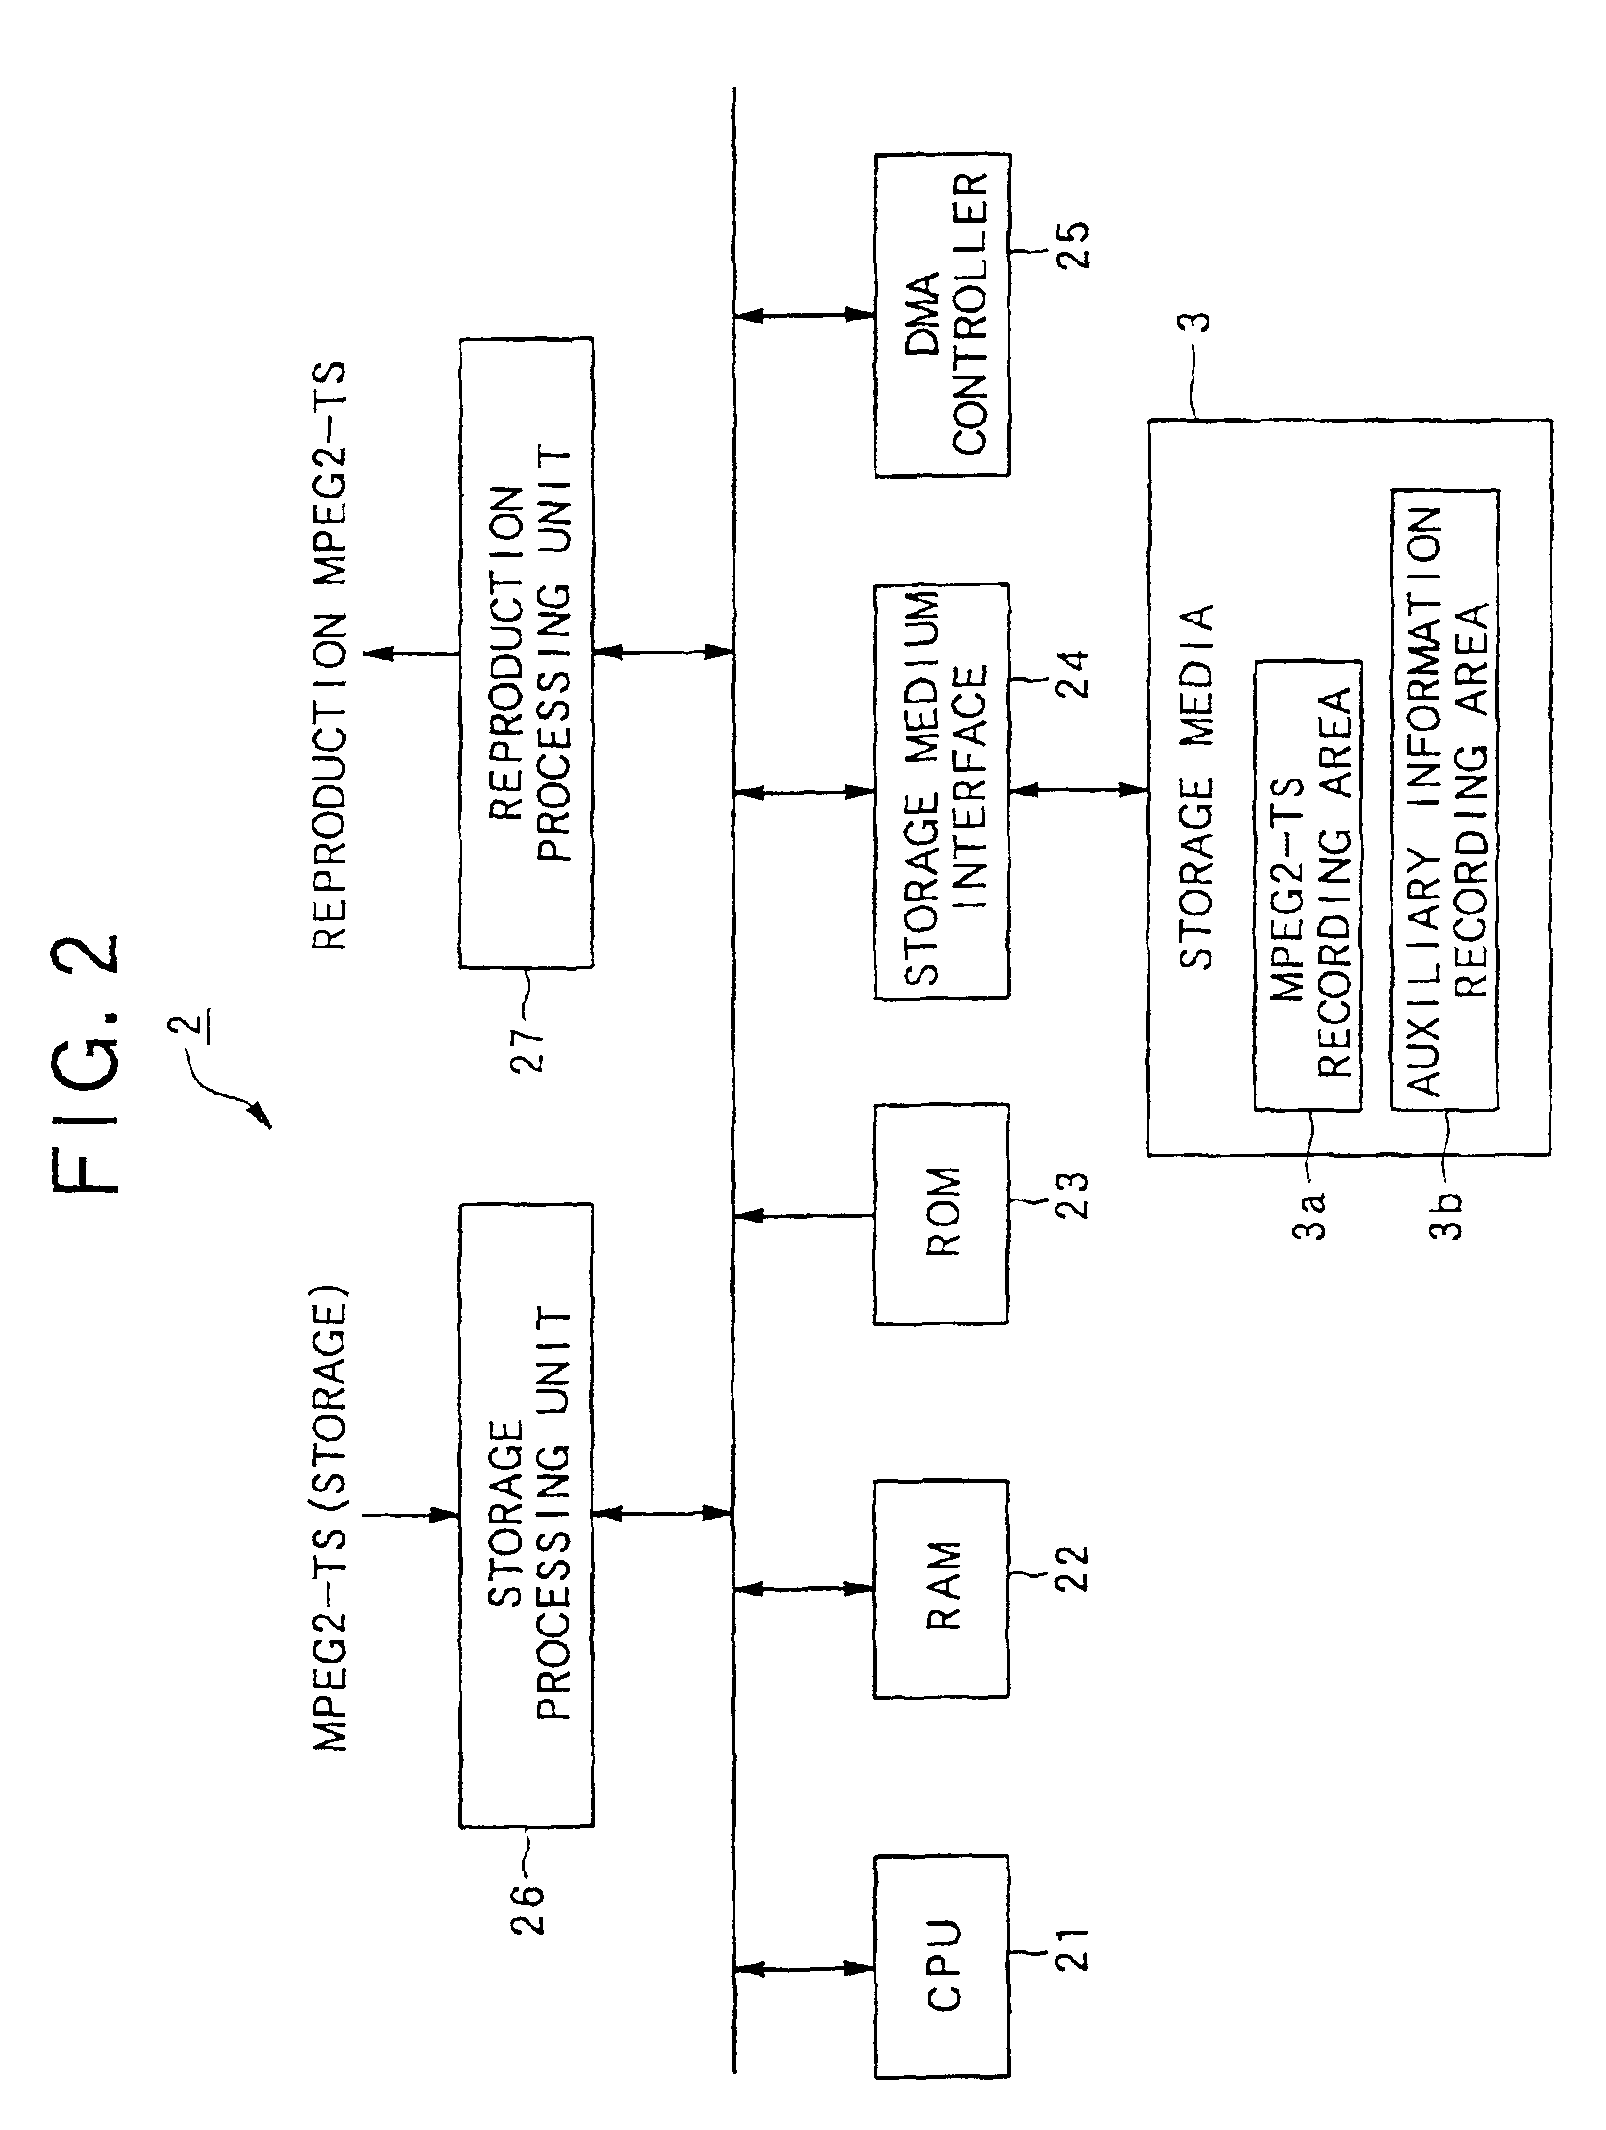 Coded data transfer control method and storage and reproduction system